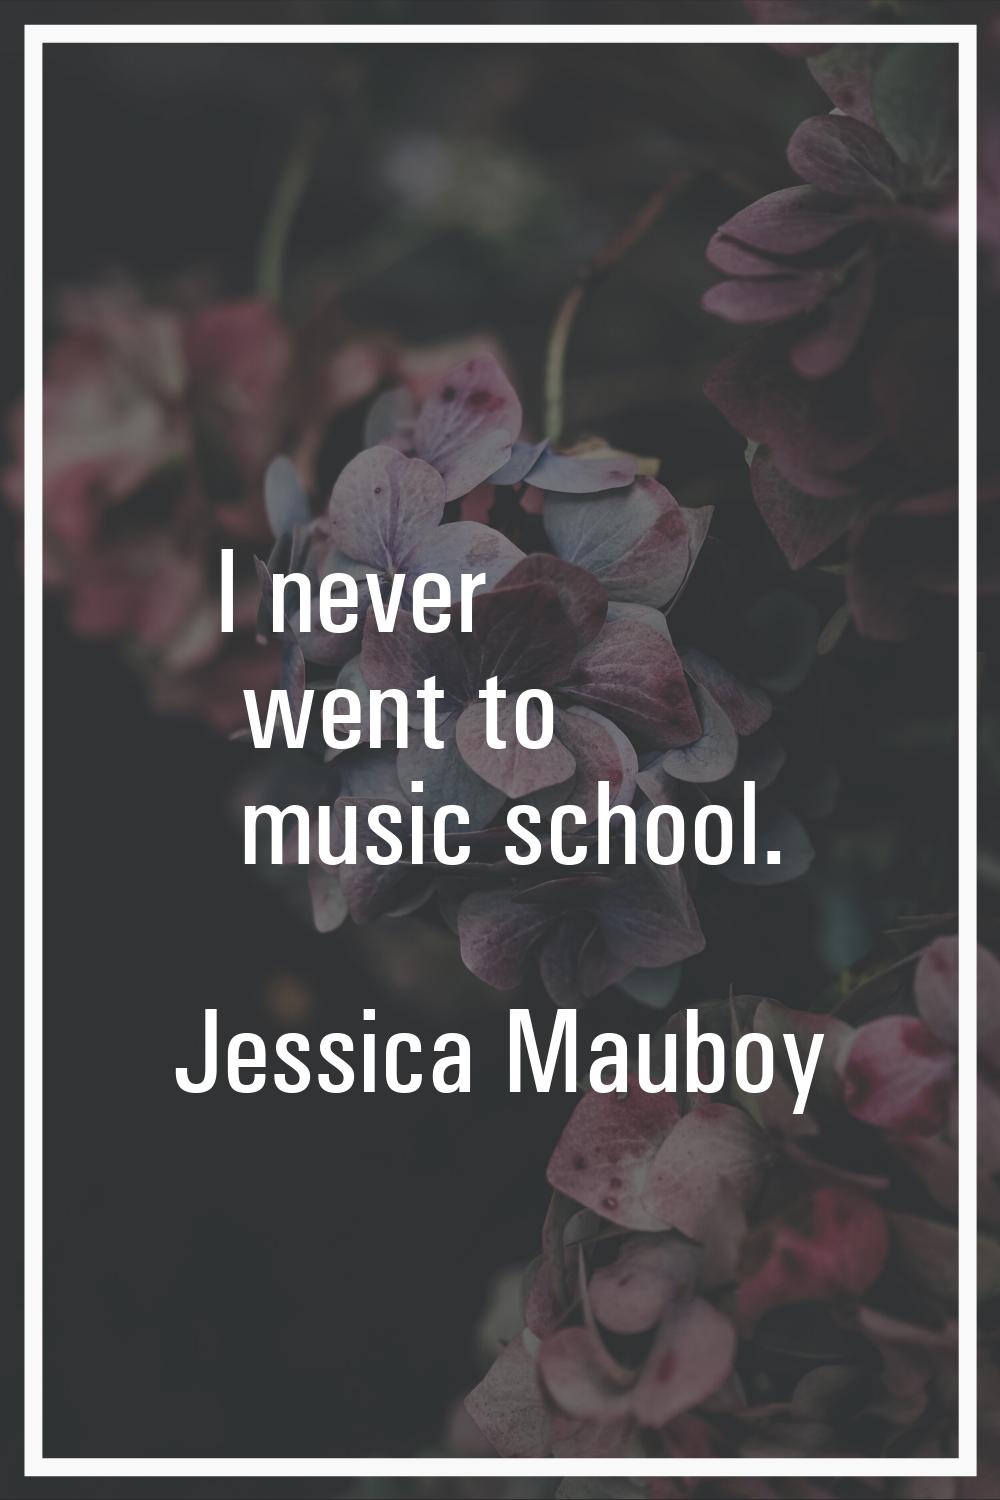 I never went to music school.